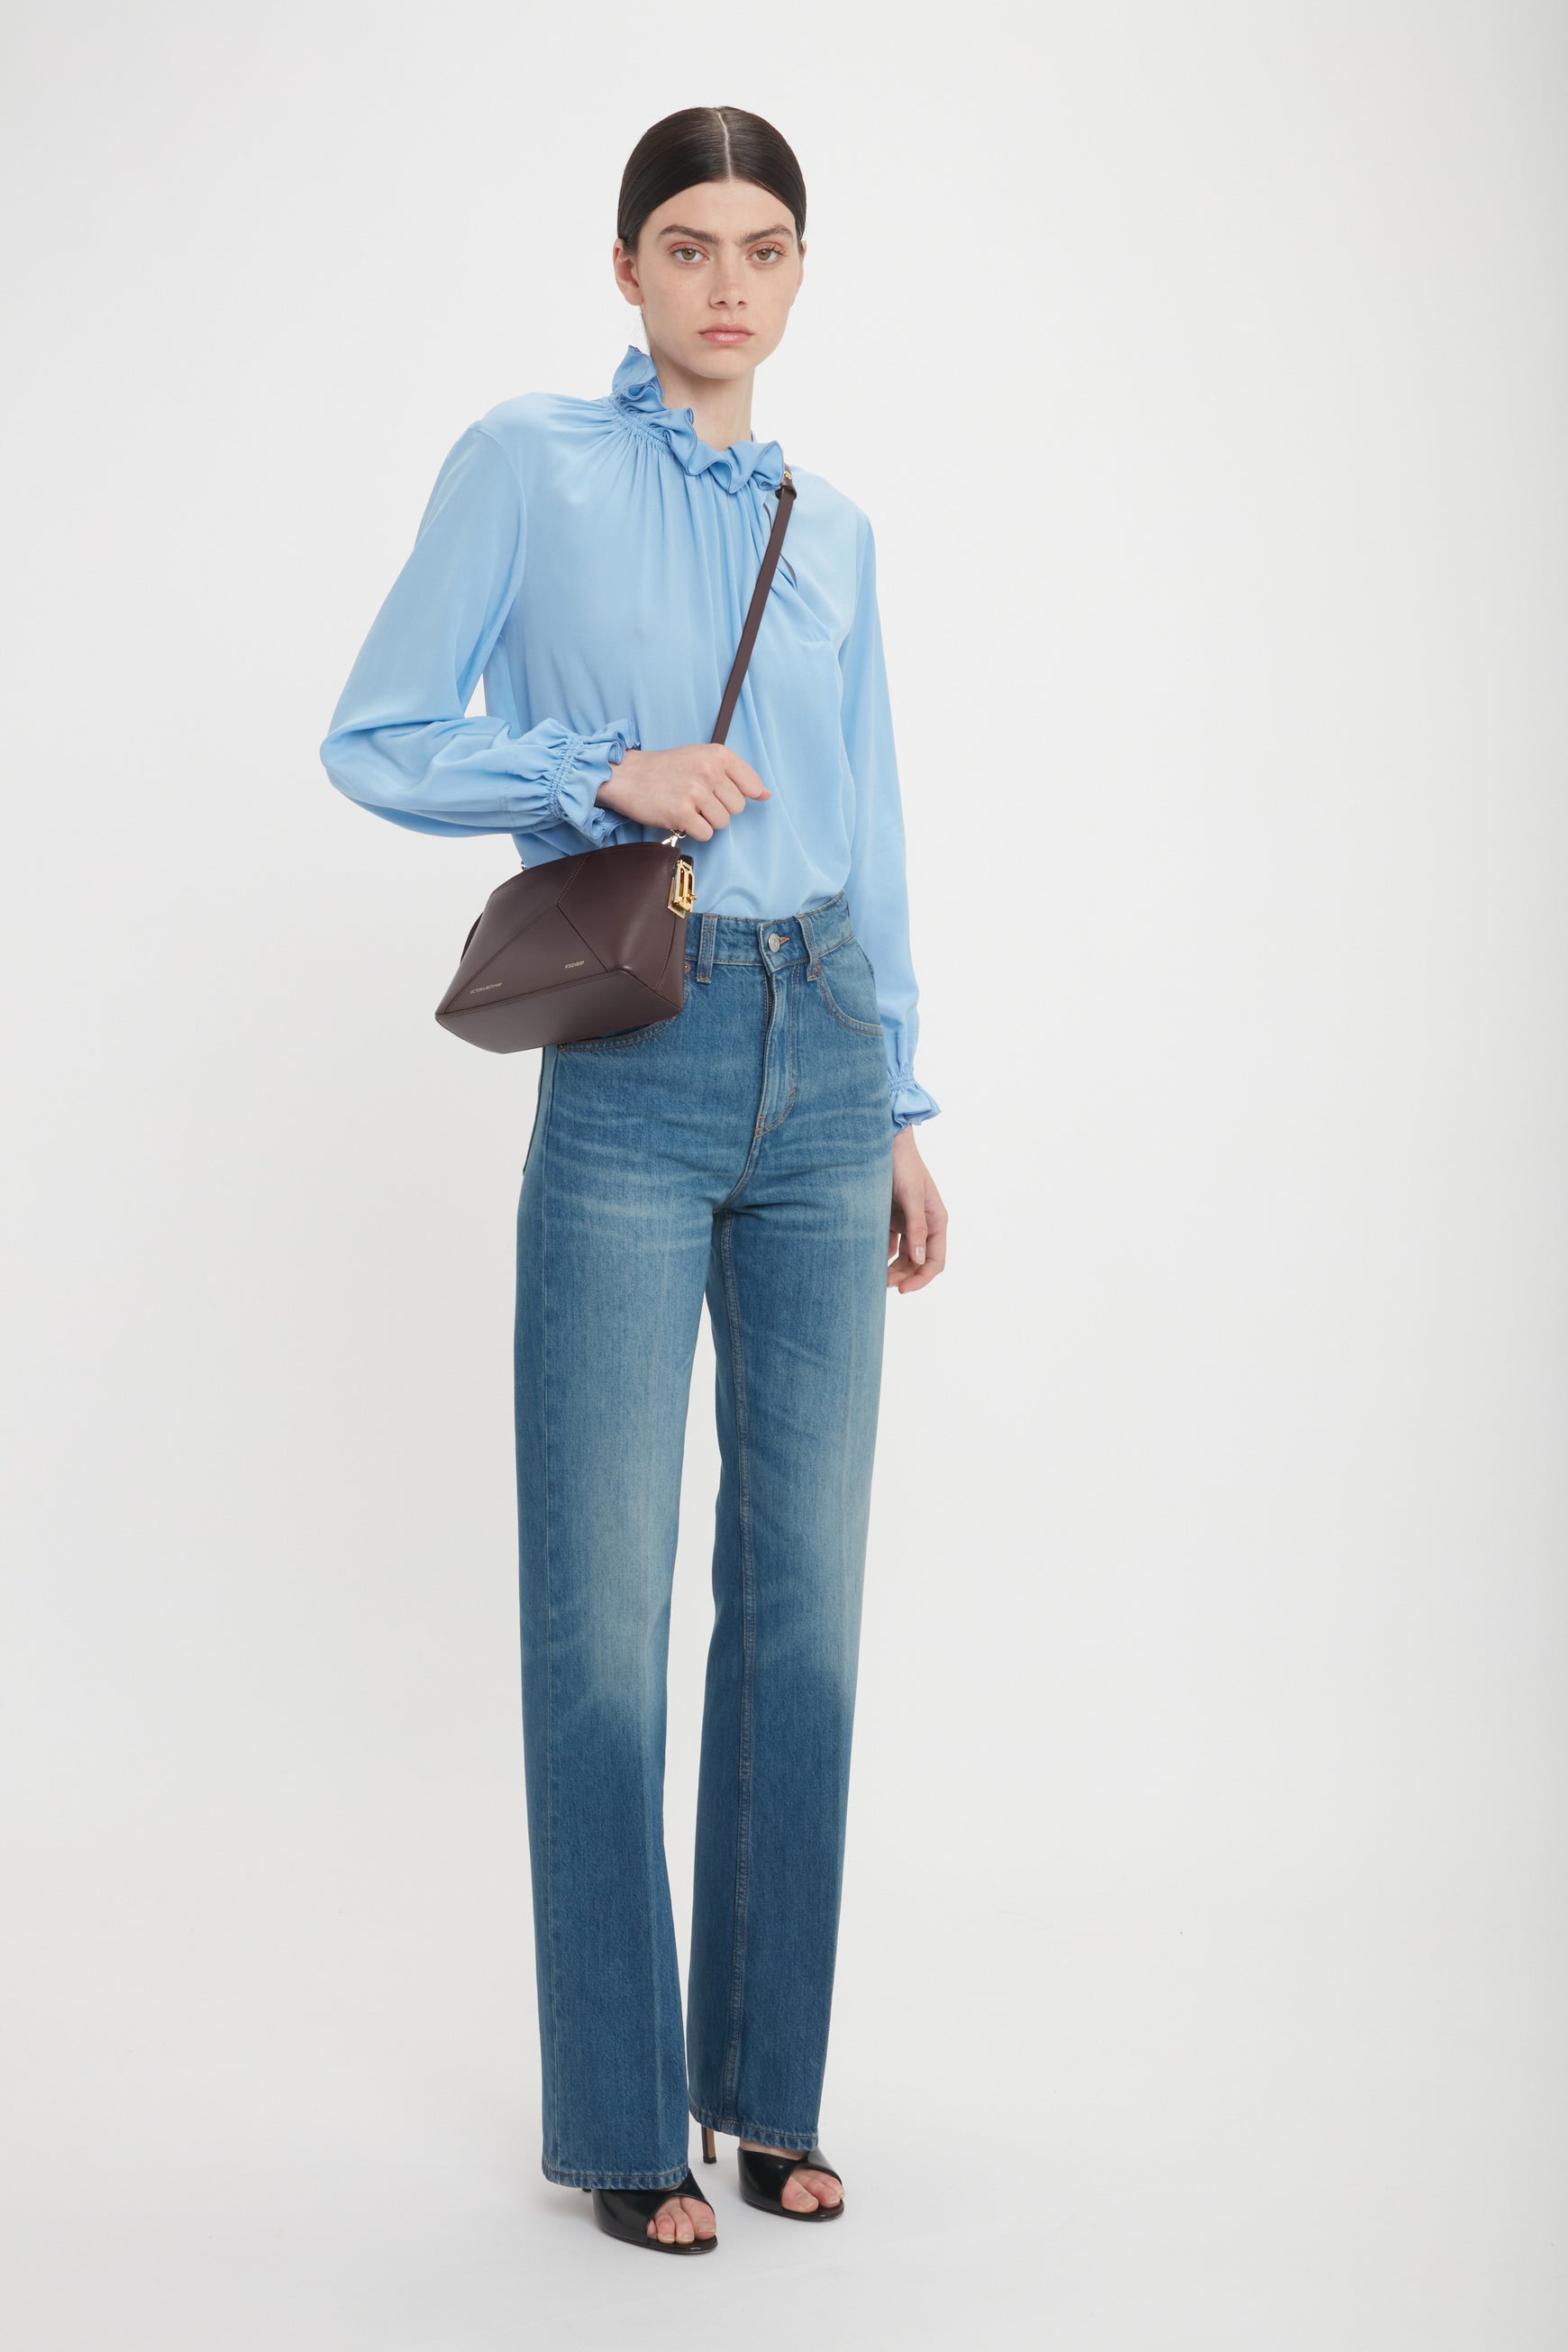 Person wearing a light blue blouse, high-waisted blue jeans, black open-toed heels, and carrying an Exclusive Victoria Crossbody Bag In Brown Leather by Victoria Beckham. The brown calf leather bag stands out as they pose against a plain white background.